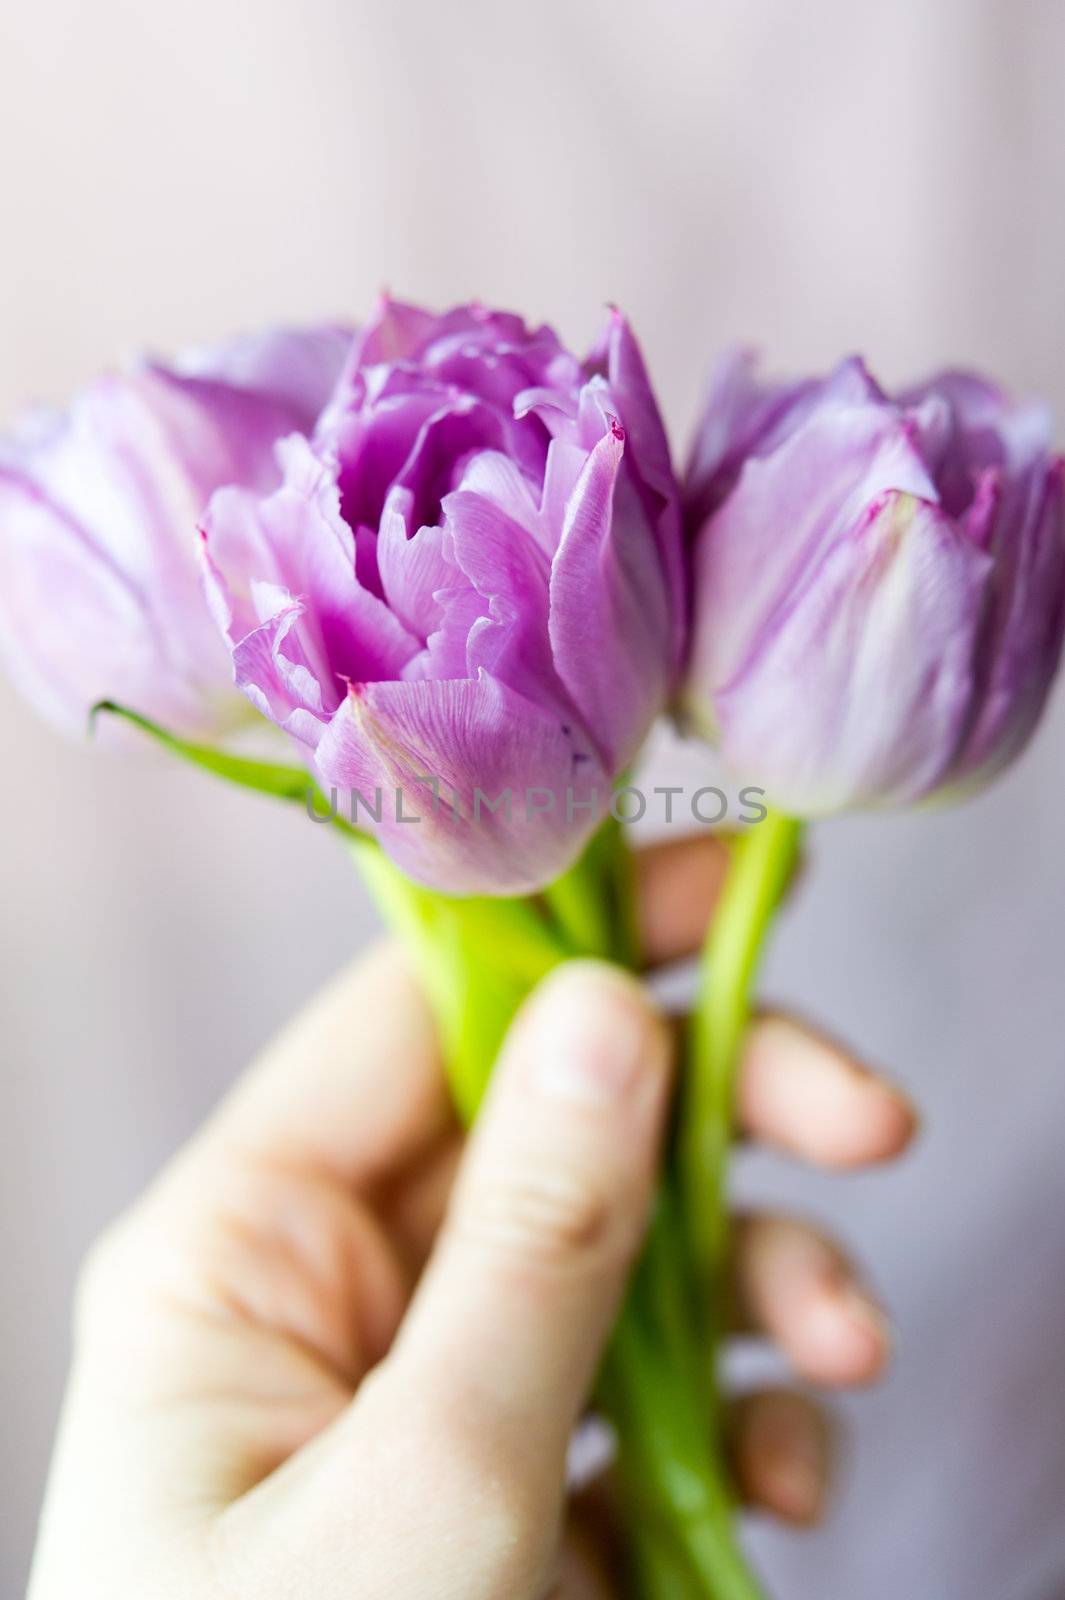 Women's hand holding small bouquet of three purple tulips against the light blurring background. Shallow DOF